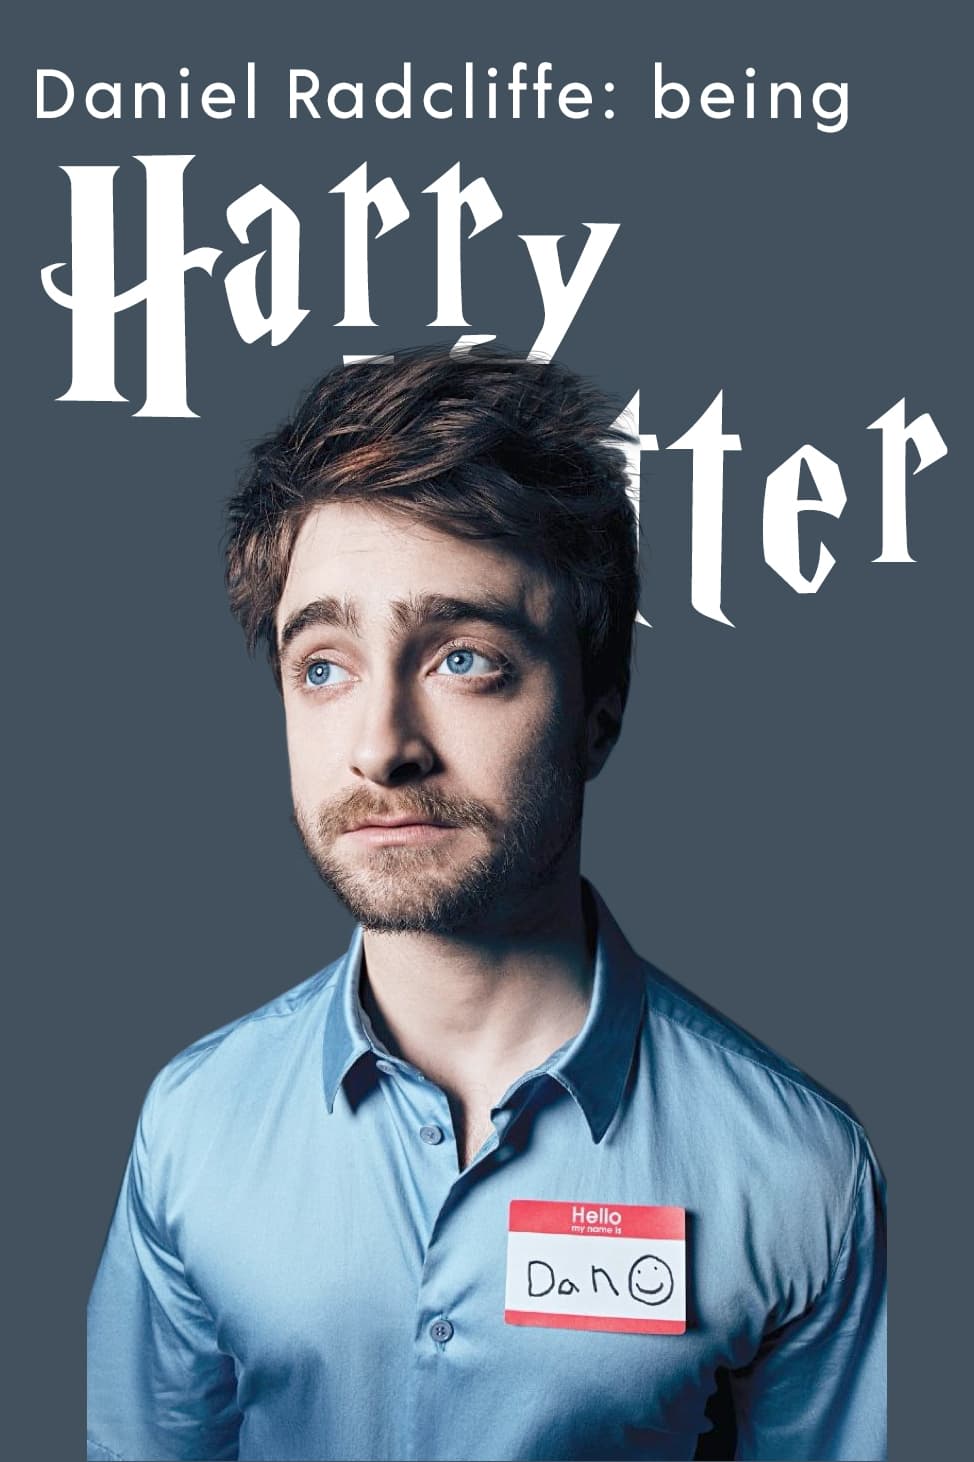 Daniel Radcliffe: Being Harry Potter (1970)